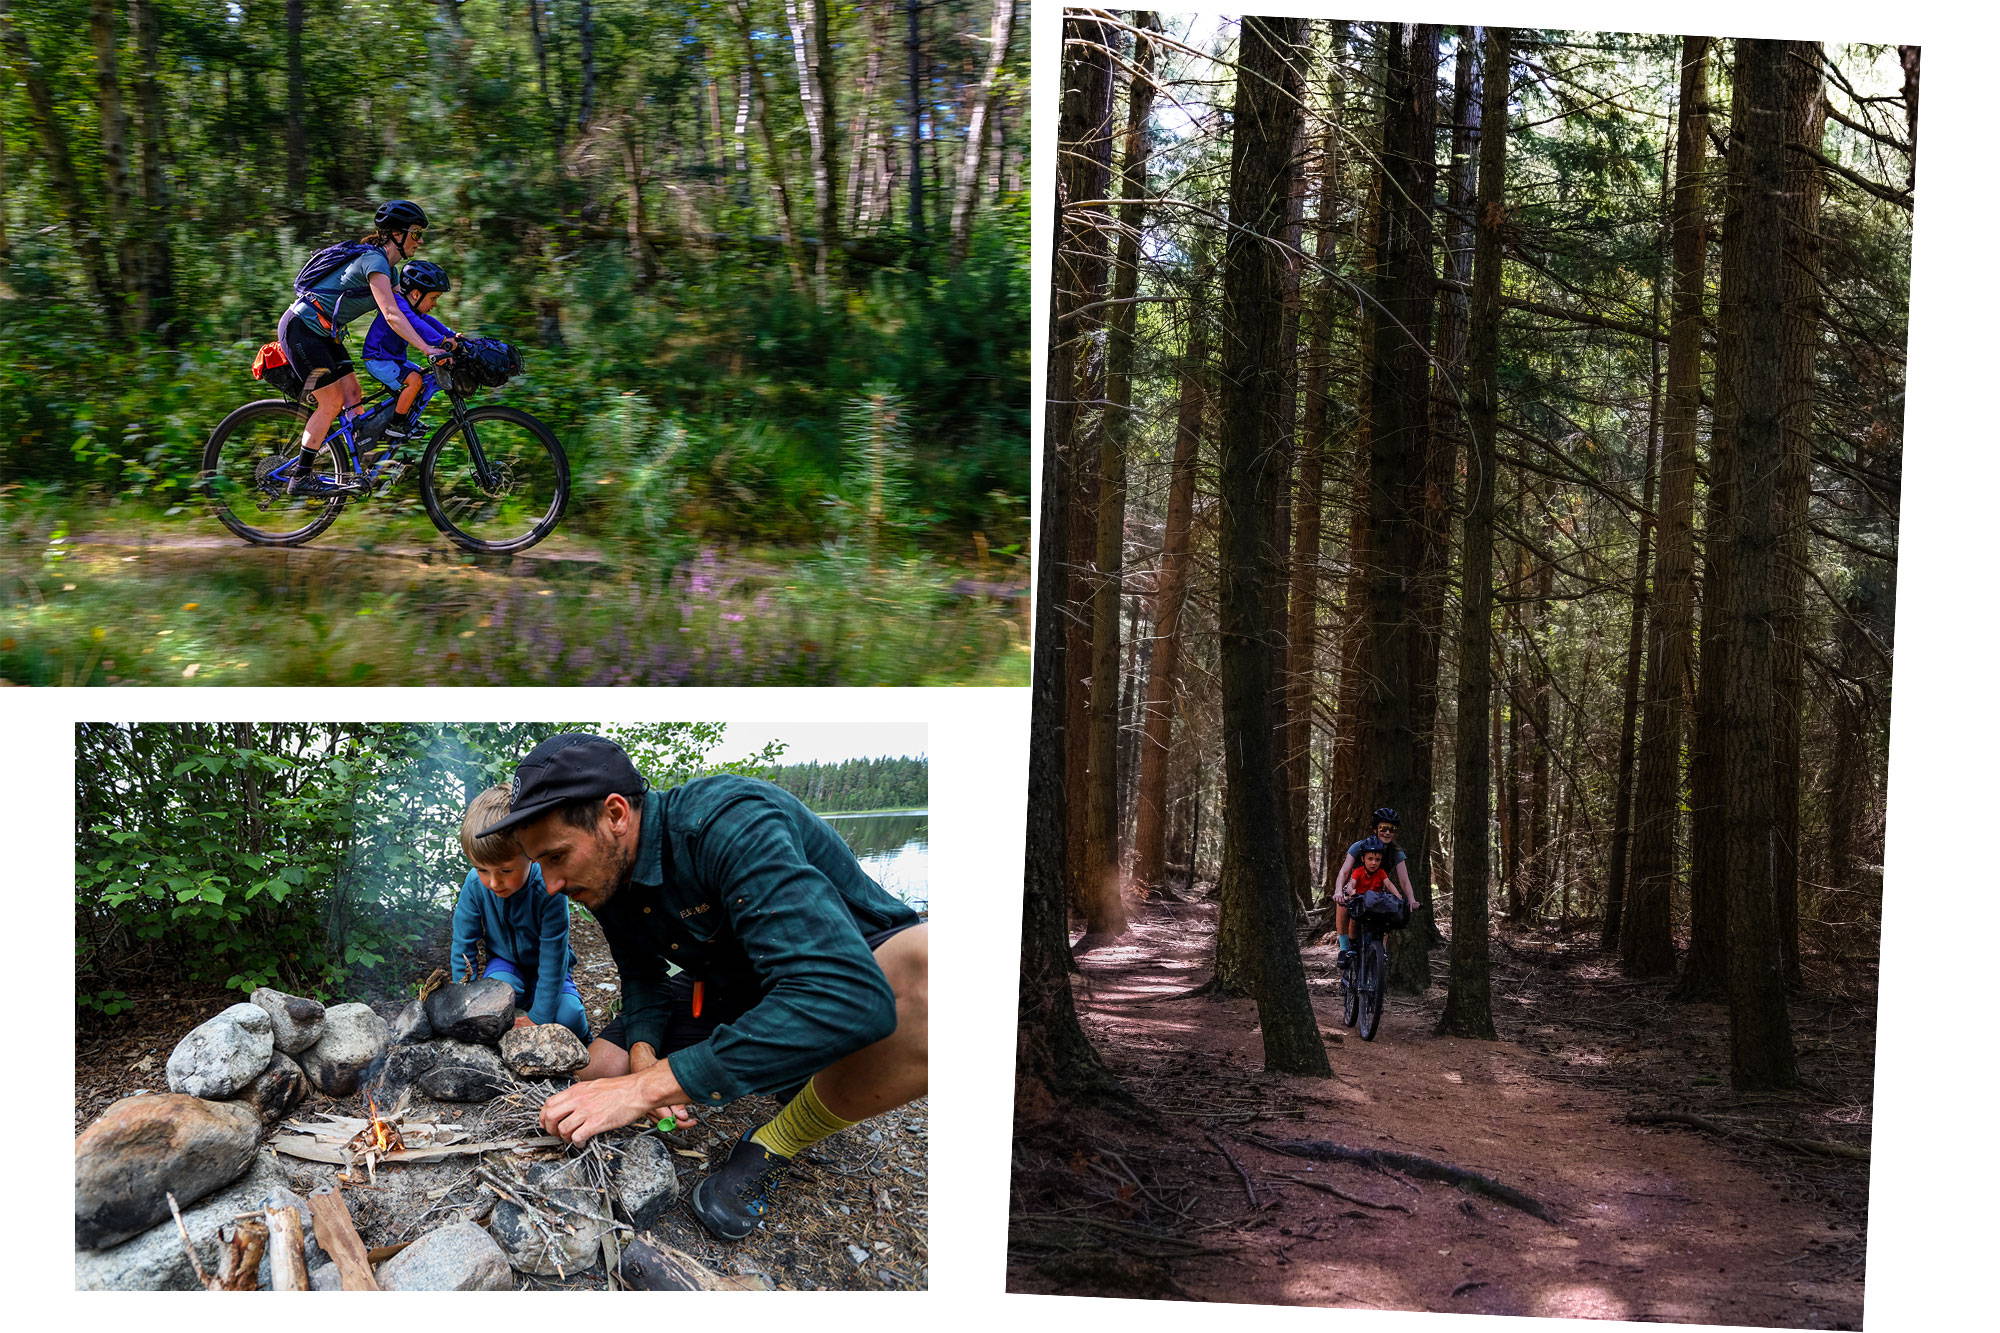 Collage of riding photos, building a fire